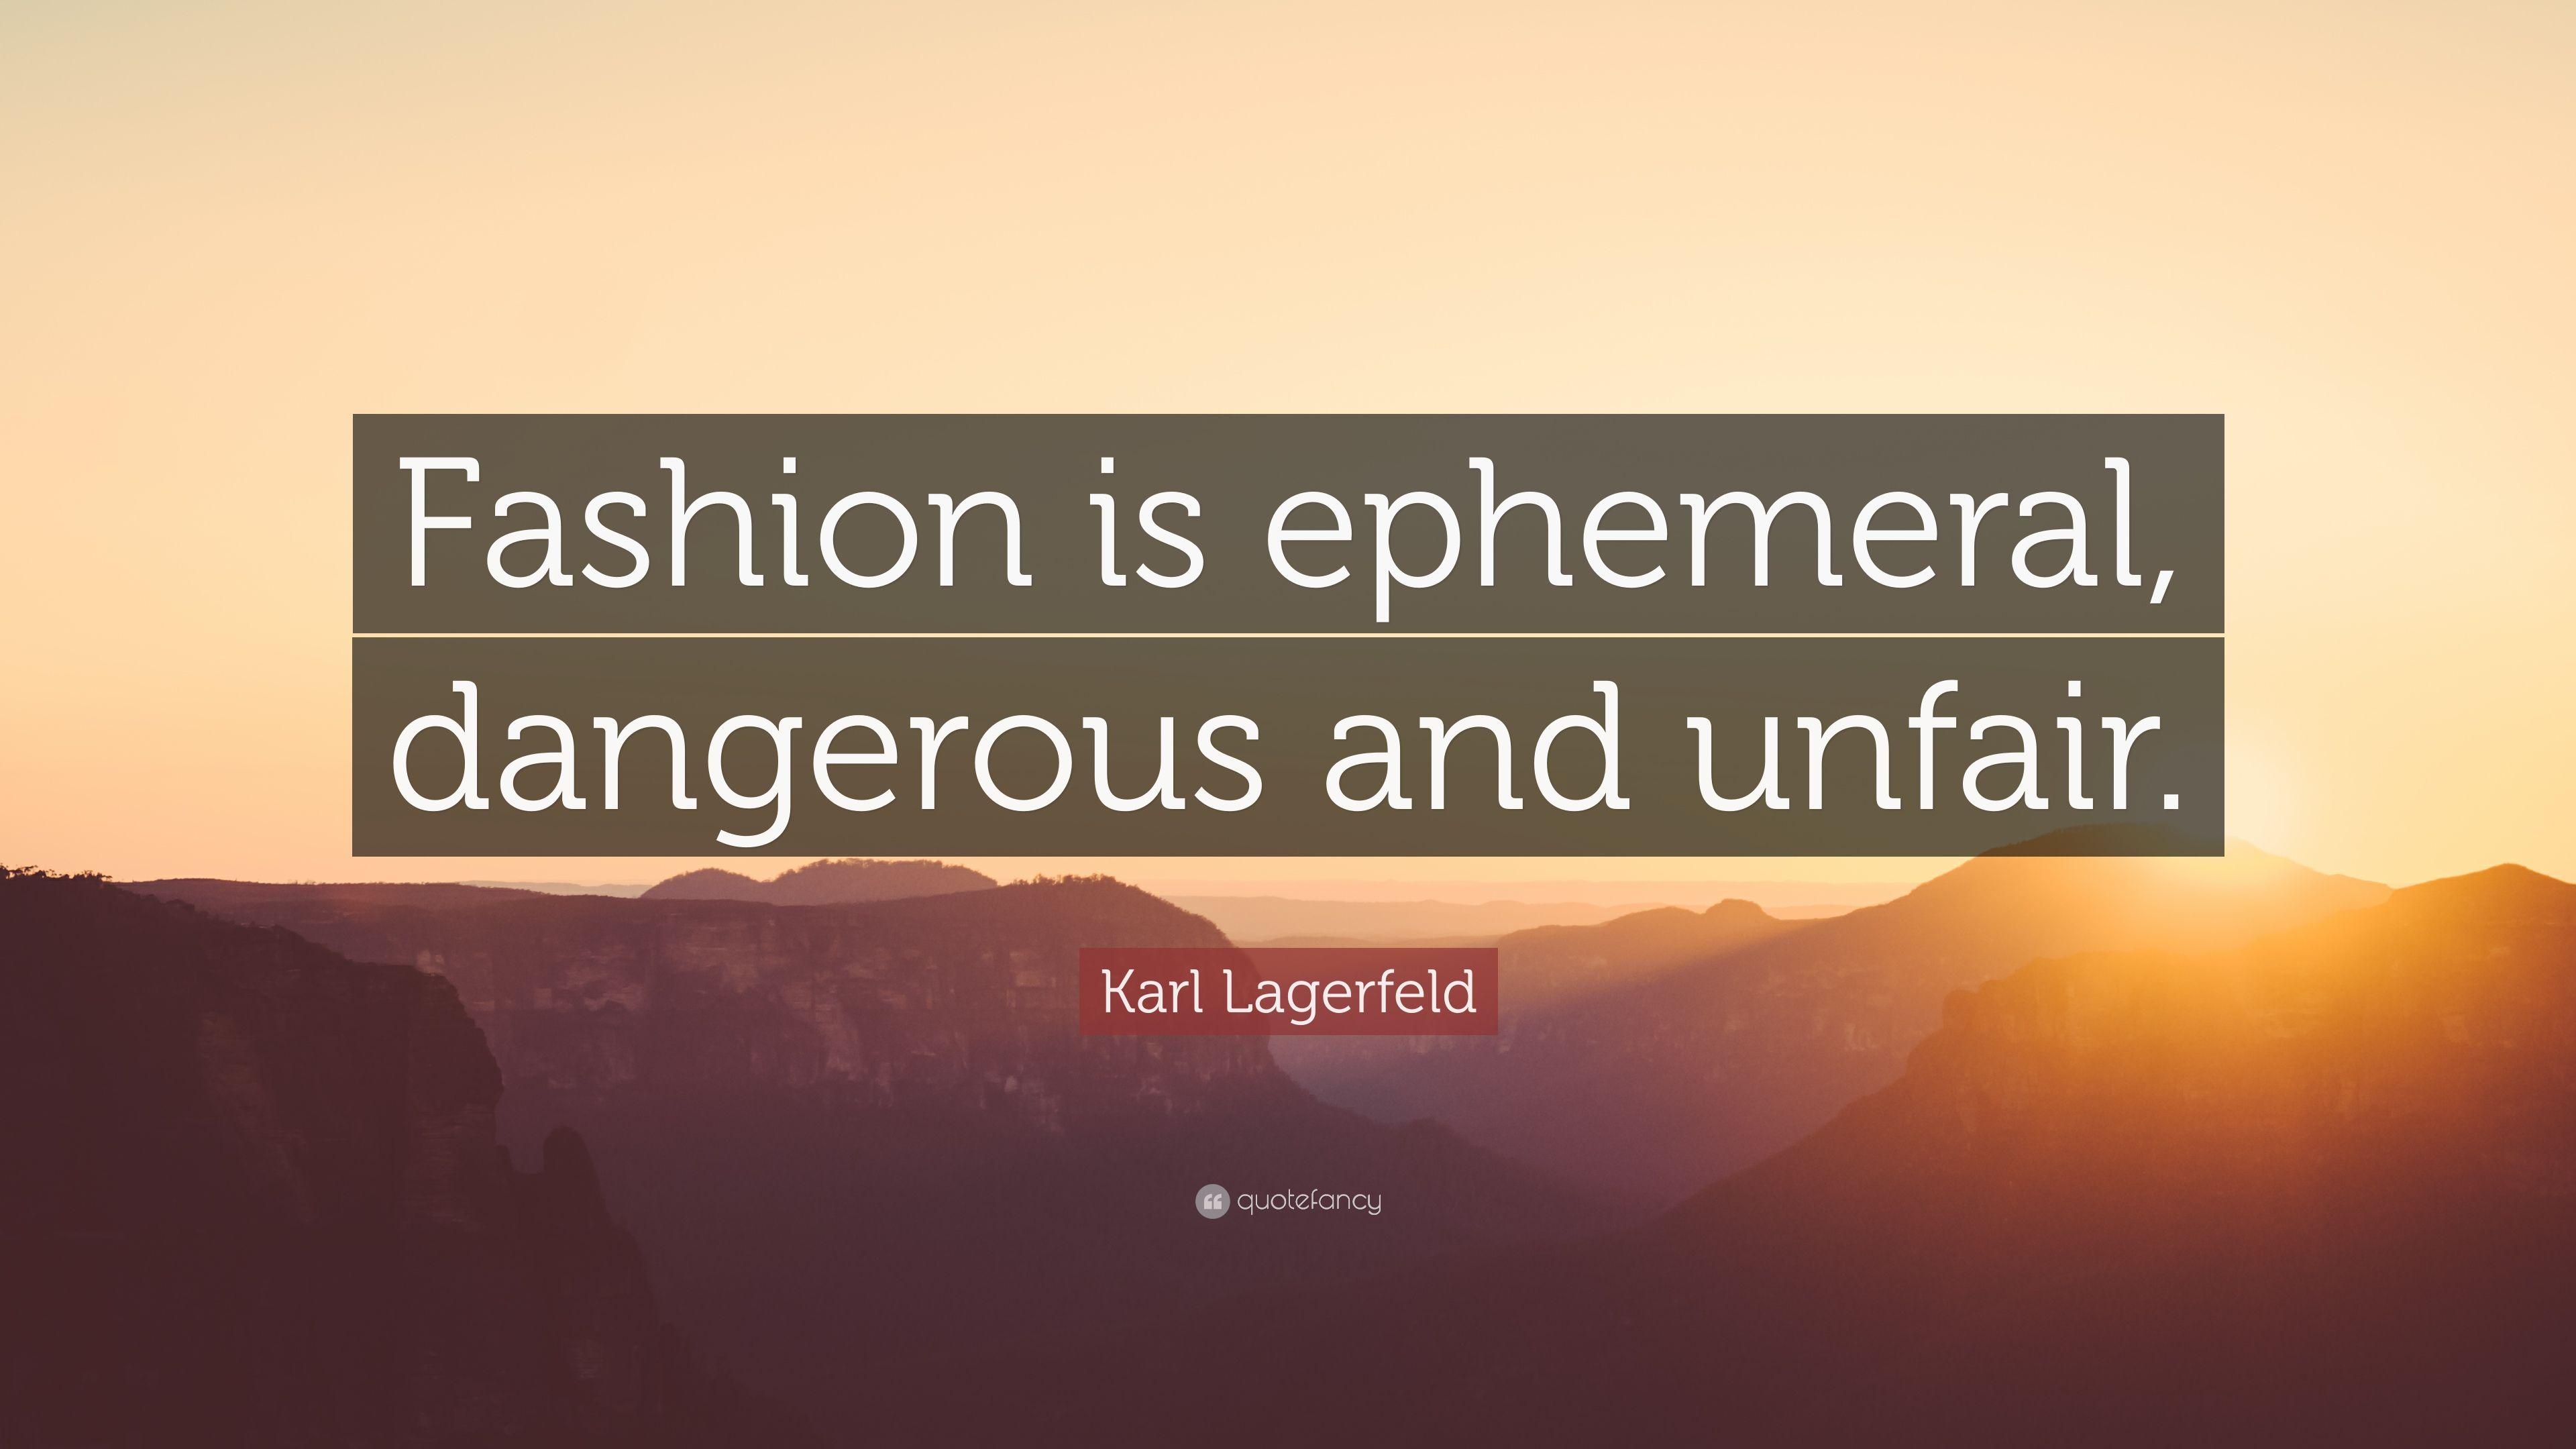 Karl Lagerfeld Quote: “Fashion is ephemeral, dangerous and unfair